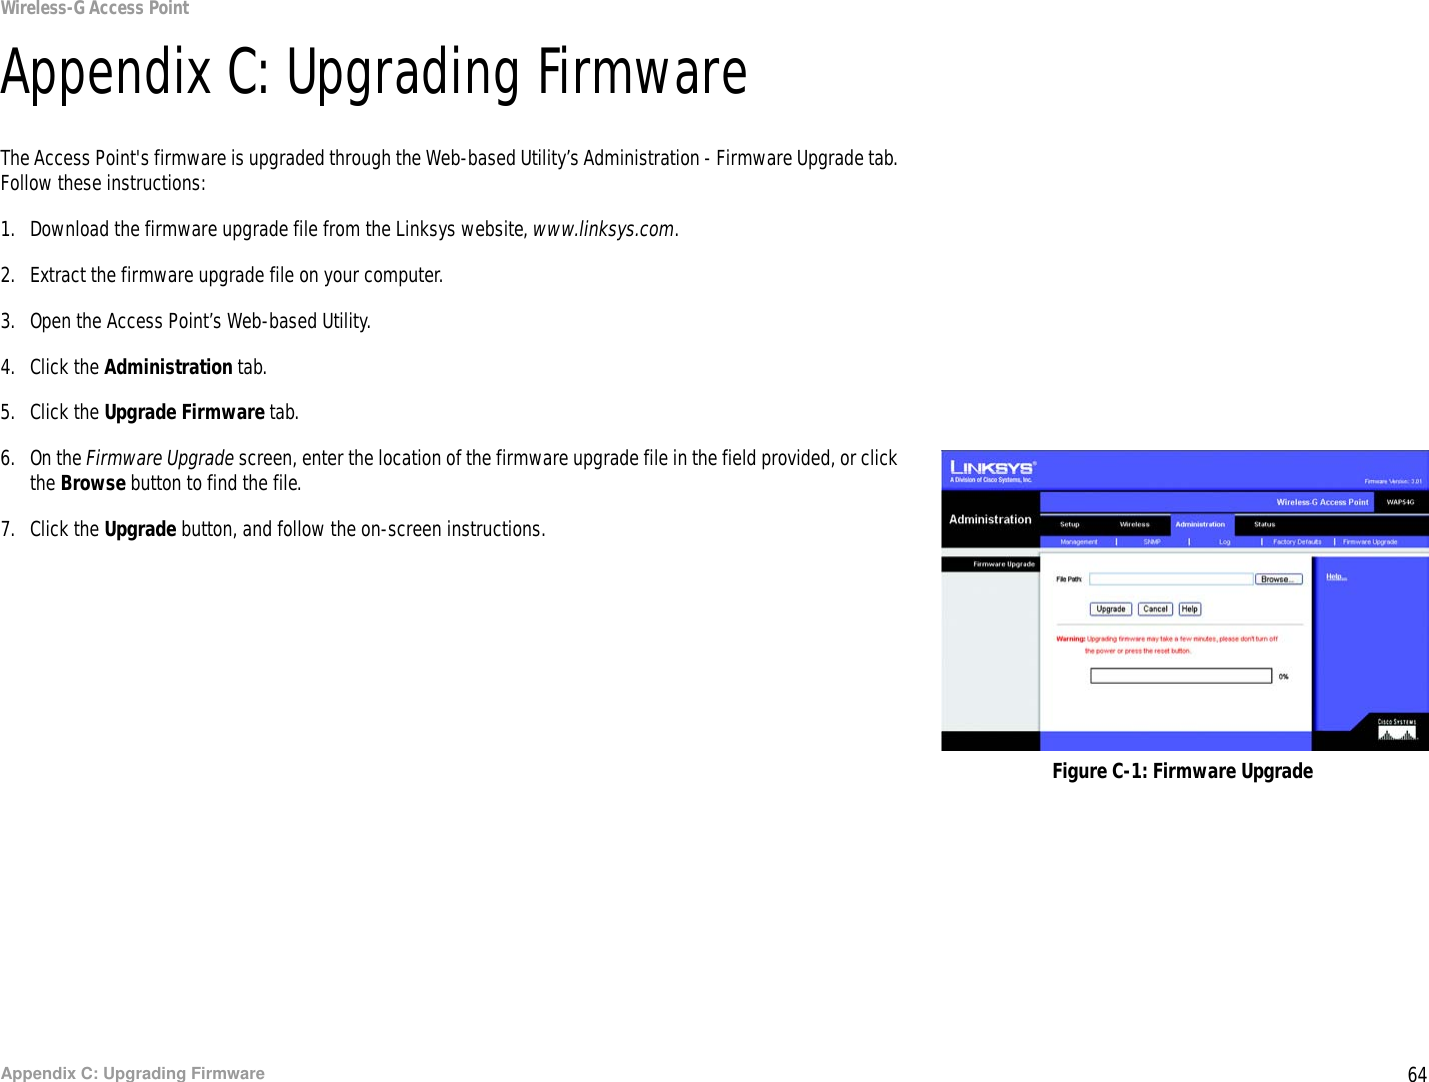 64Appendix C: Upgrading FirmwareWireless-G Access PointAppendix C: Upgrading FirmwareThe Access Point&apos;s firmware is upgraded through the Web-based Utility’s Administration - Firmware Upgrade tab. Follow these instructions:1. Download the firmware upgrade file from the Linksys website, www.linksys.com.2. Extract the firmware upgrade file on your computer.3. Open the Access Point’s Web-based Utility.4. Click the Administration tab.5. Click the Upgrade Firmware tab.6. On the Firmware Upgrade screen, enter the location of the firmware upgrade file in the field provided, or click the Browse button to find the file.7. Click the Upgrade button, and follow the on-screen instructions.Figure C-1: Firmware Upgrade